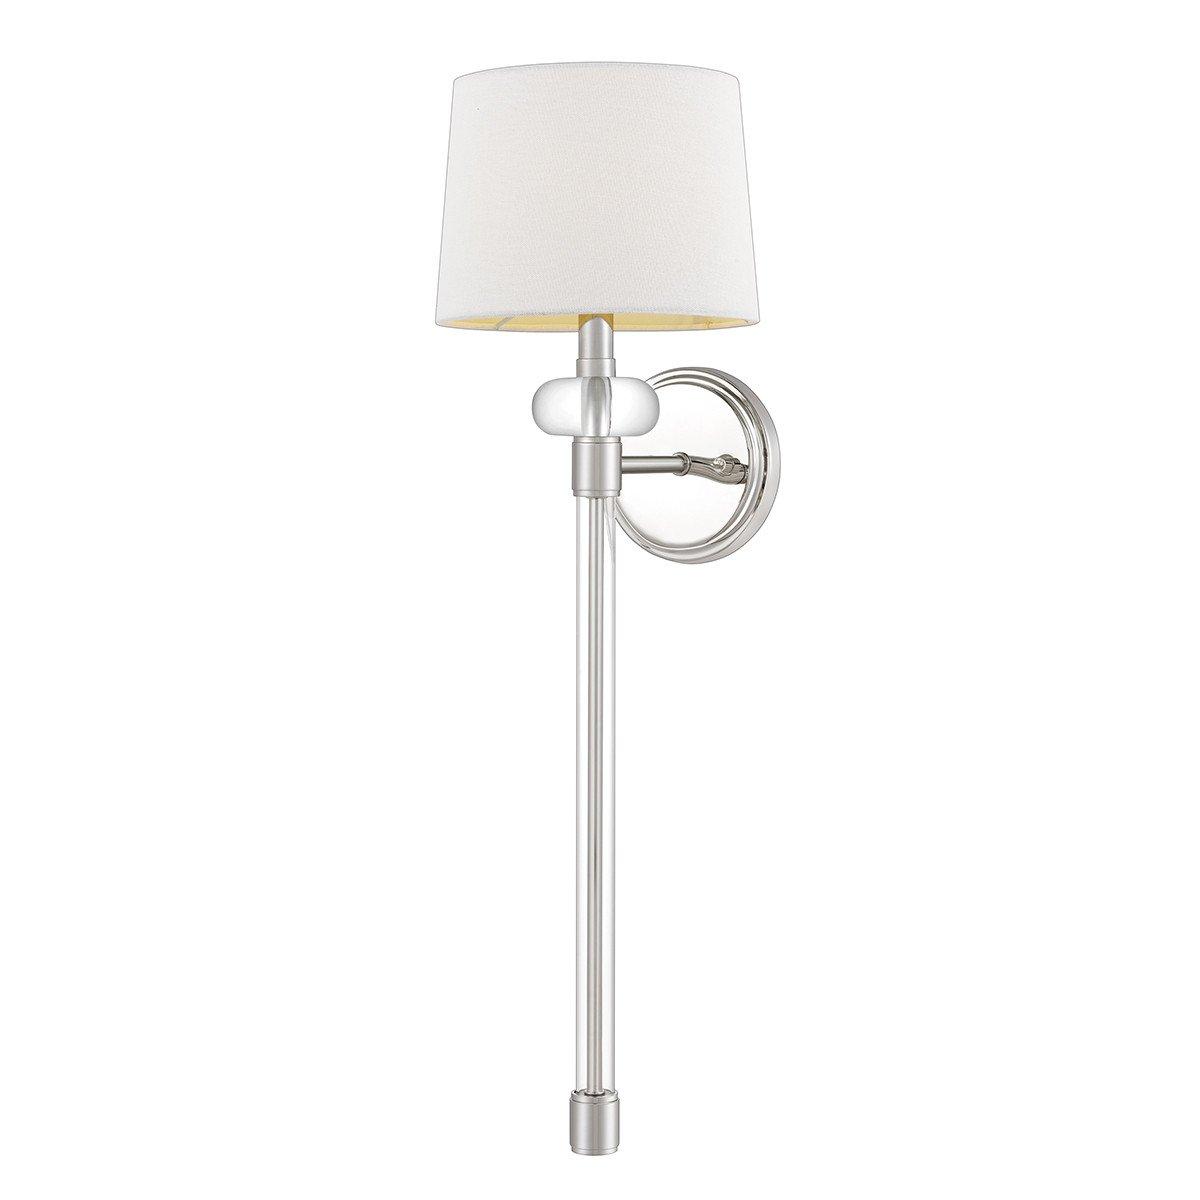 Quoizel Barbour Wall Lamp with Shade Polished Nickel